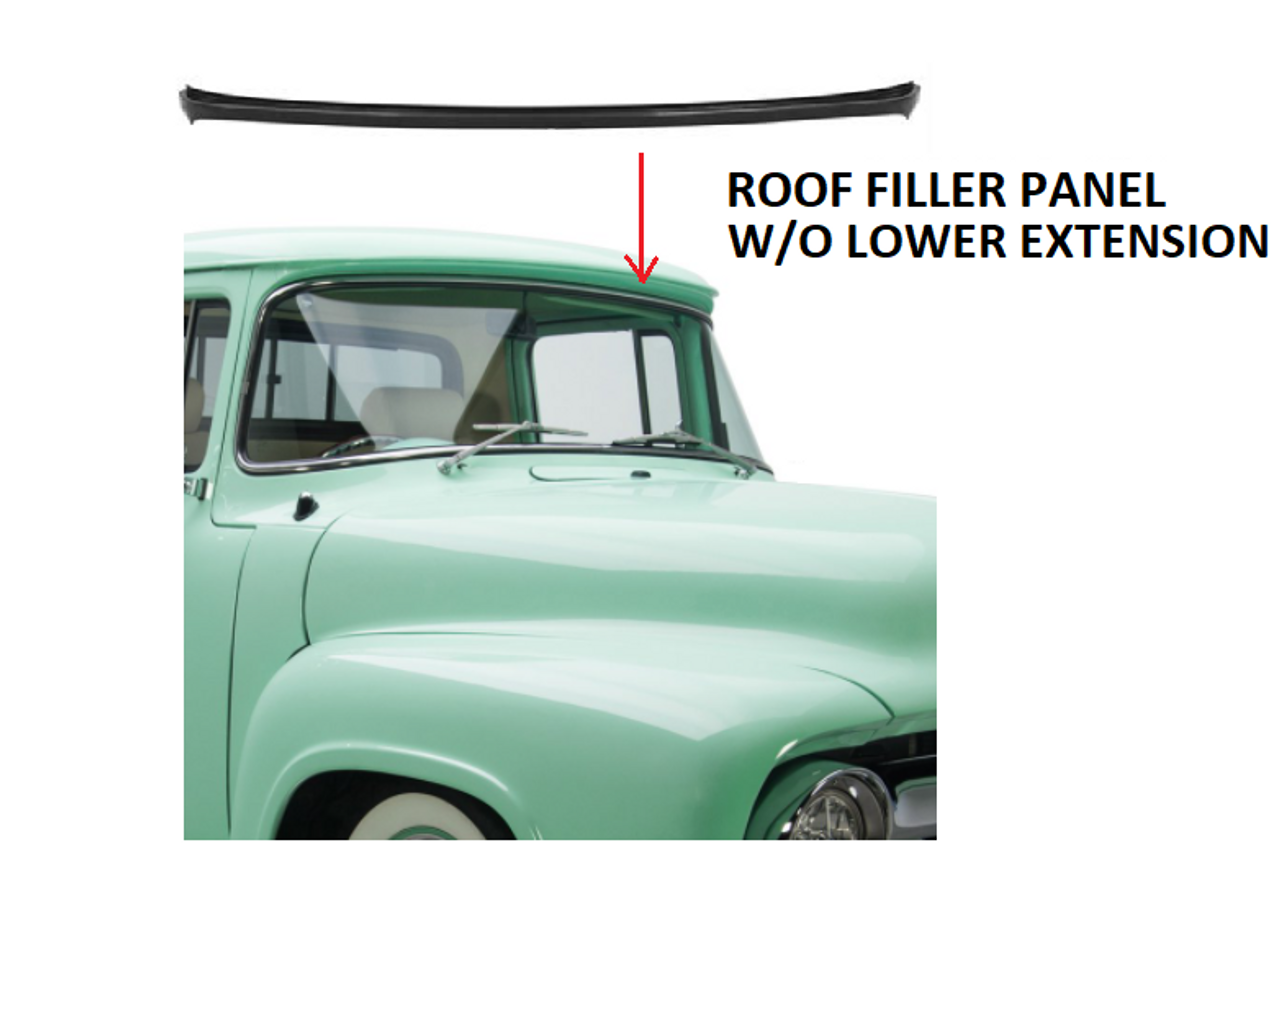 1956 Ford Truck Roof Filler Panel without Extionsion, ea. (overhang aboue windshield)